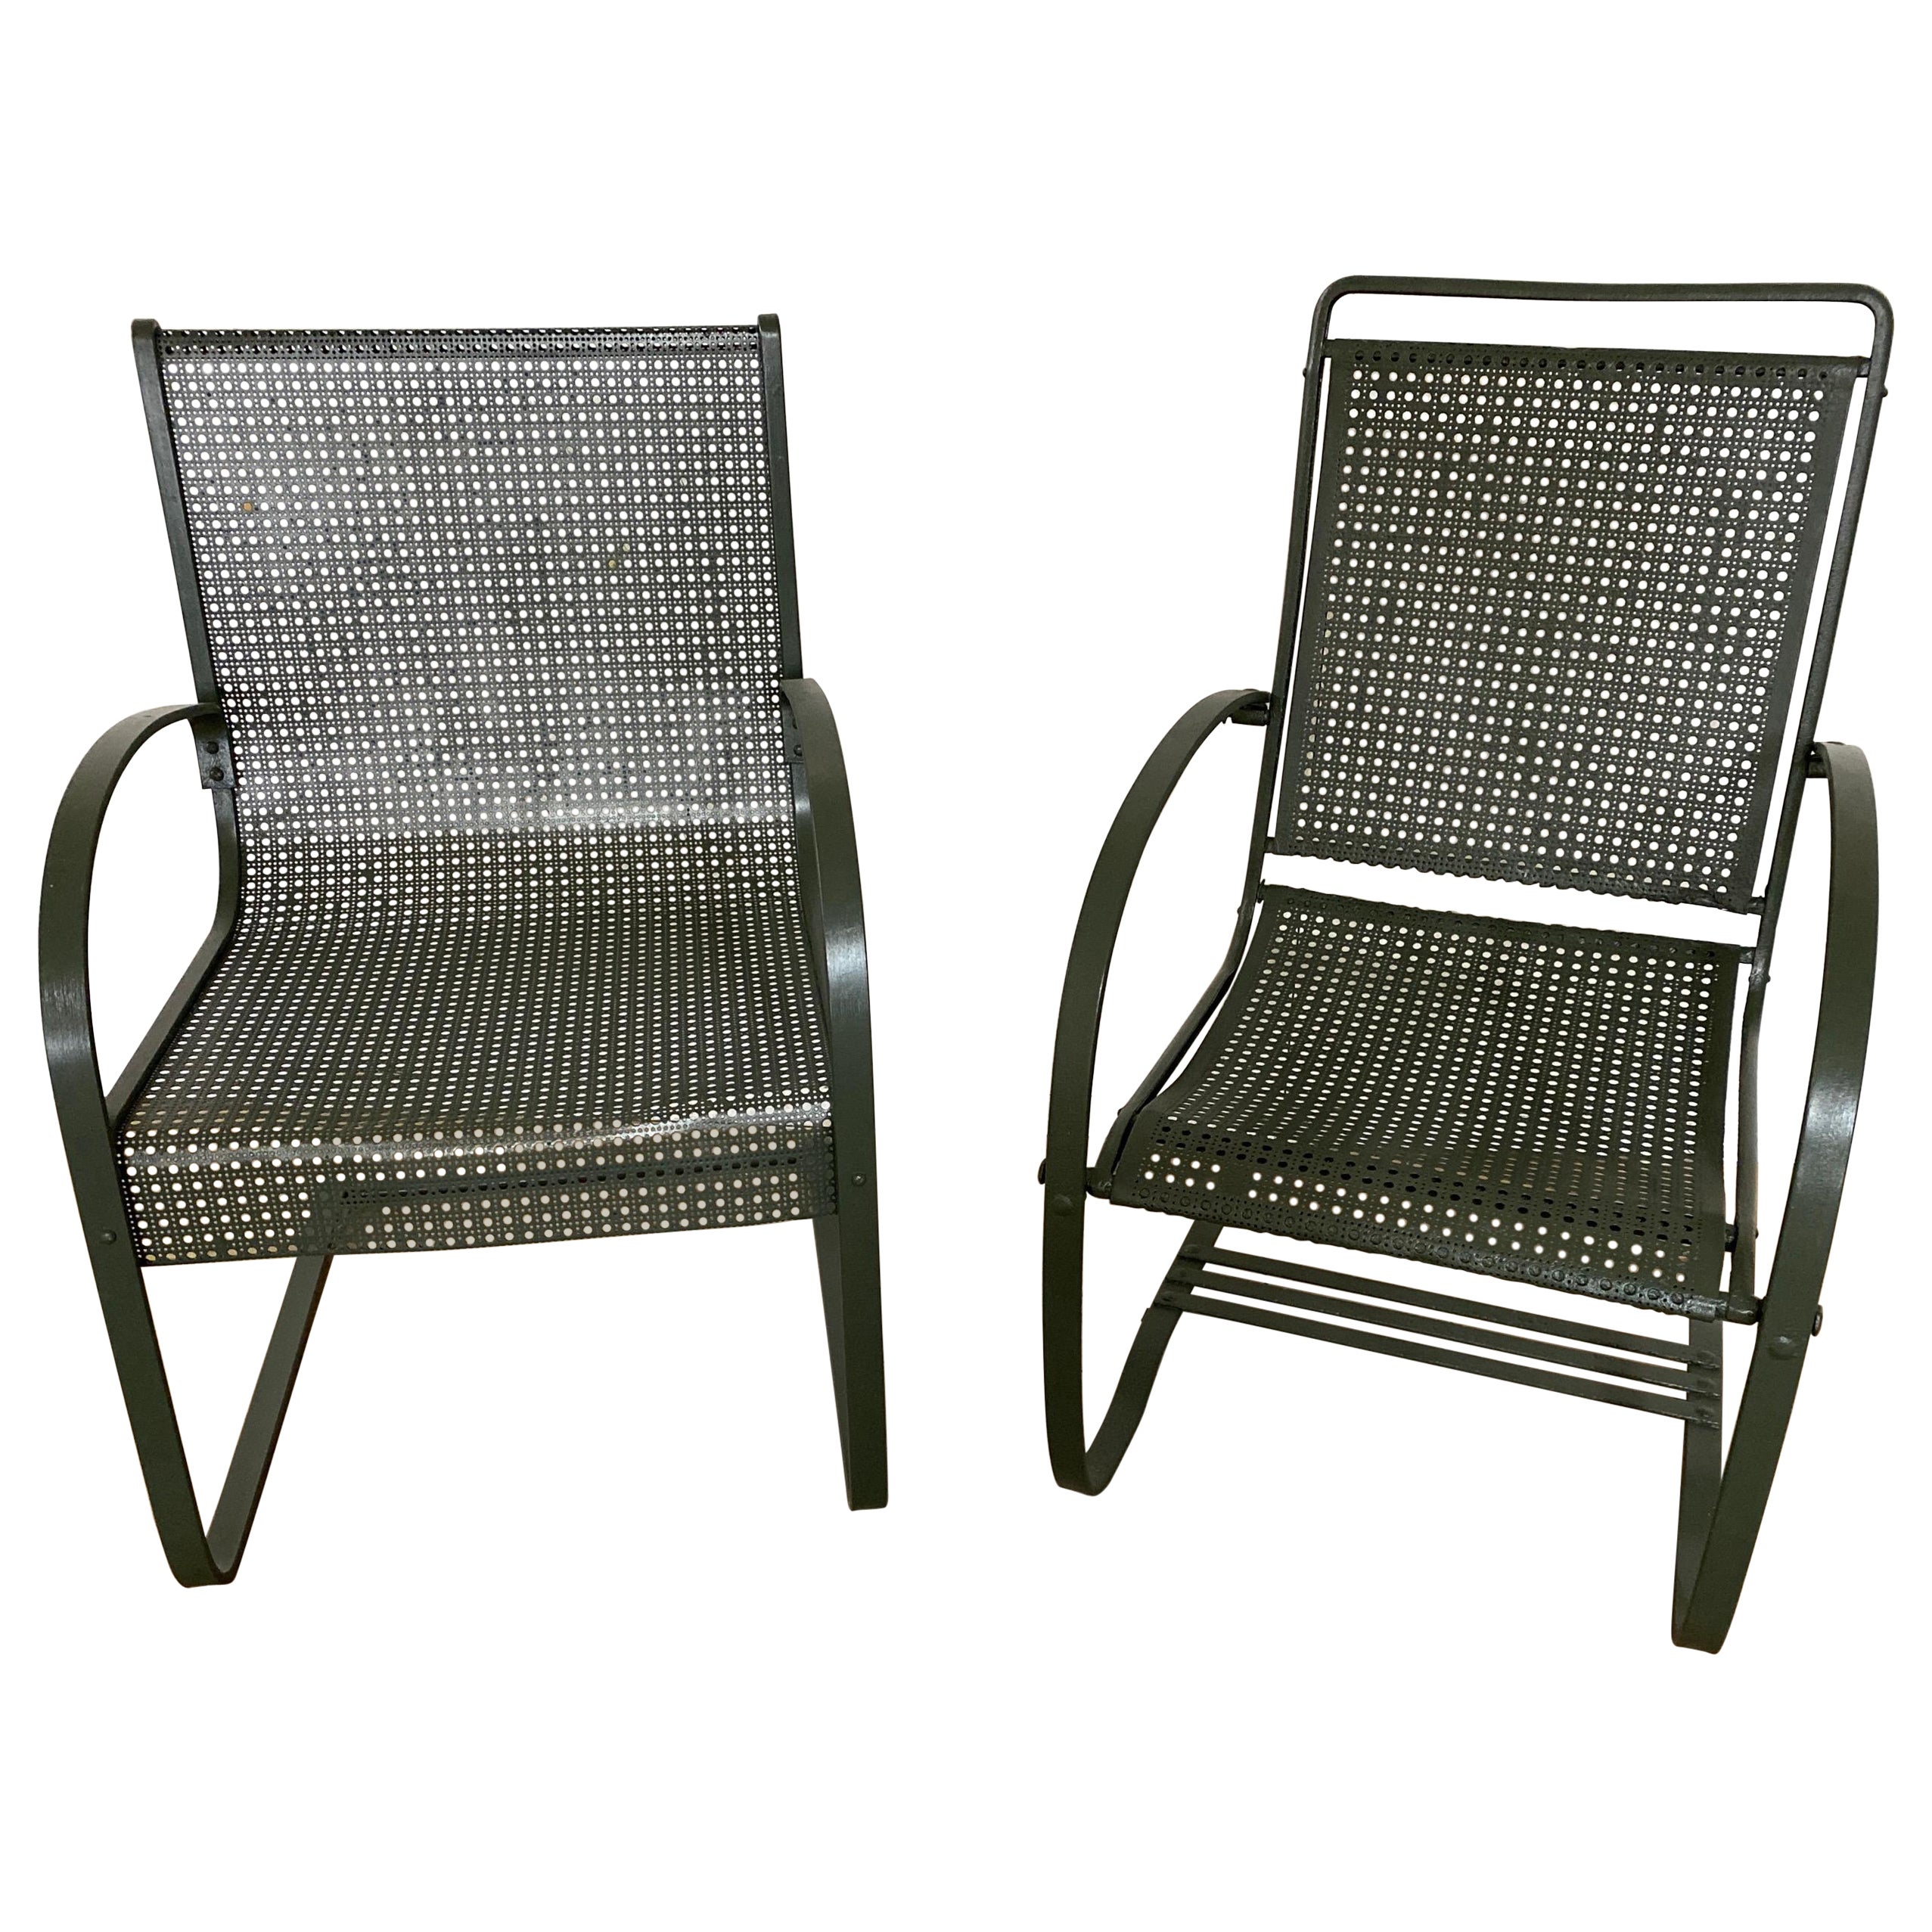 Two Antique Spring Steel Garden Arm Chairs For Sale